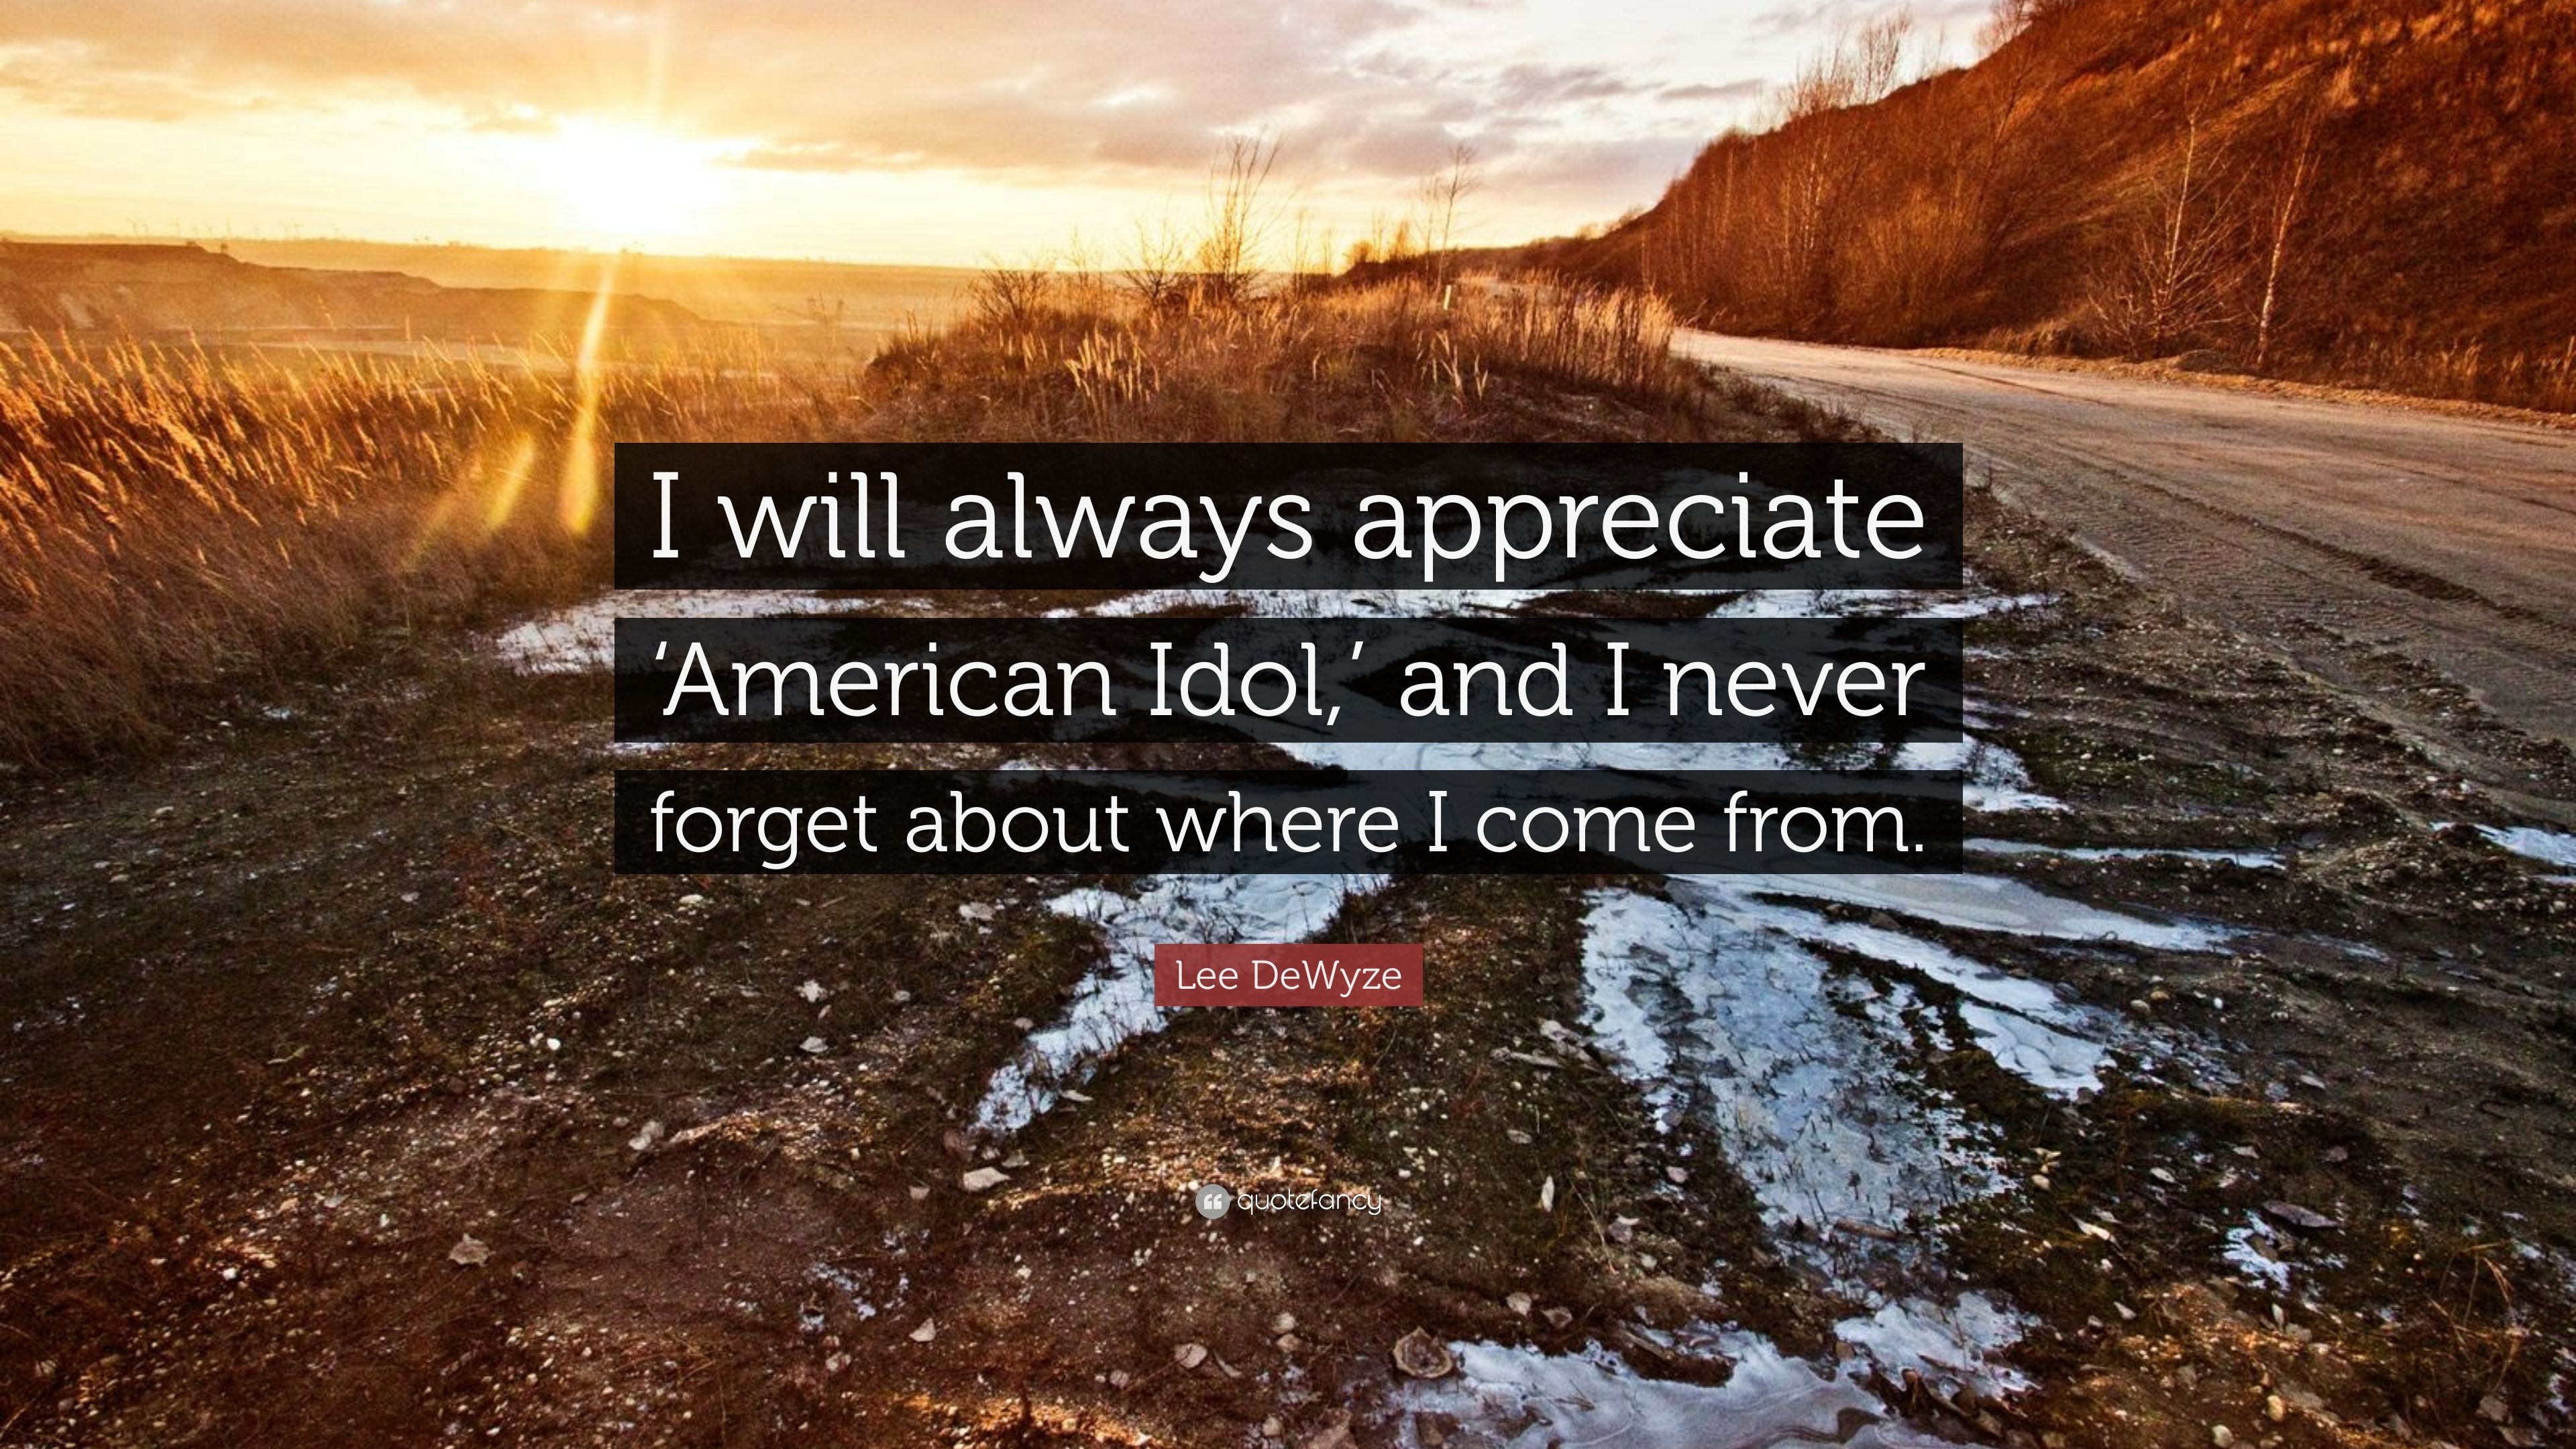 Lee DeWyze Quote: “I will always appreciate 'American Idol, ' and I